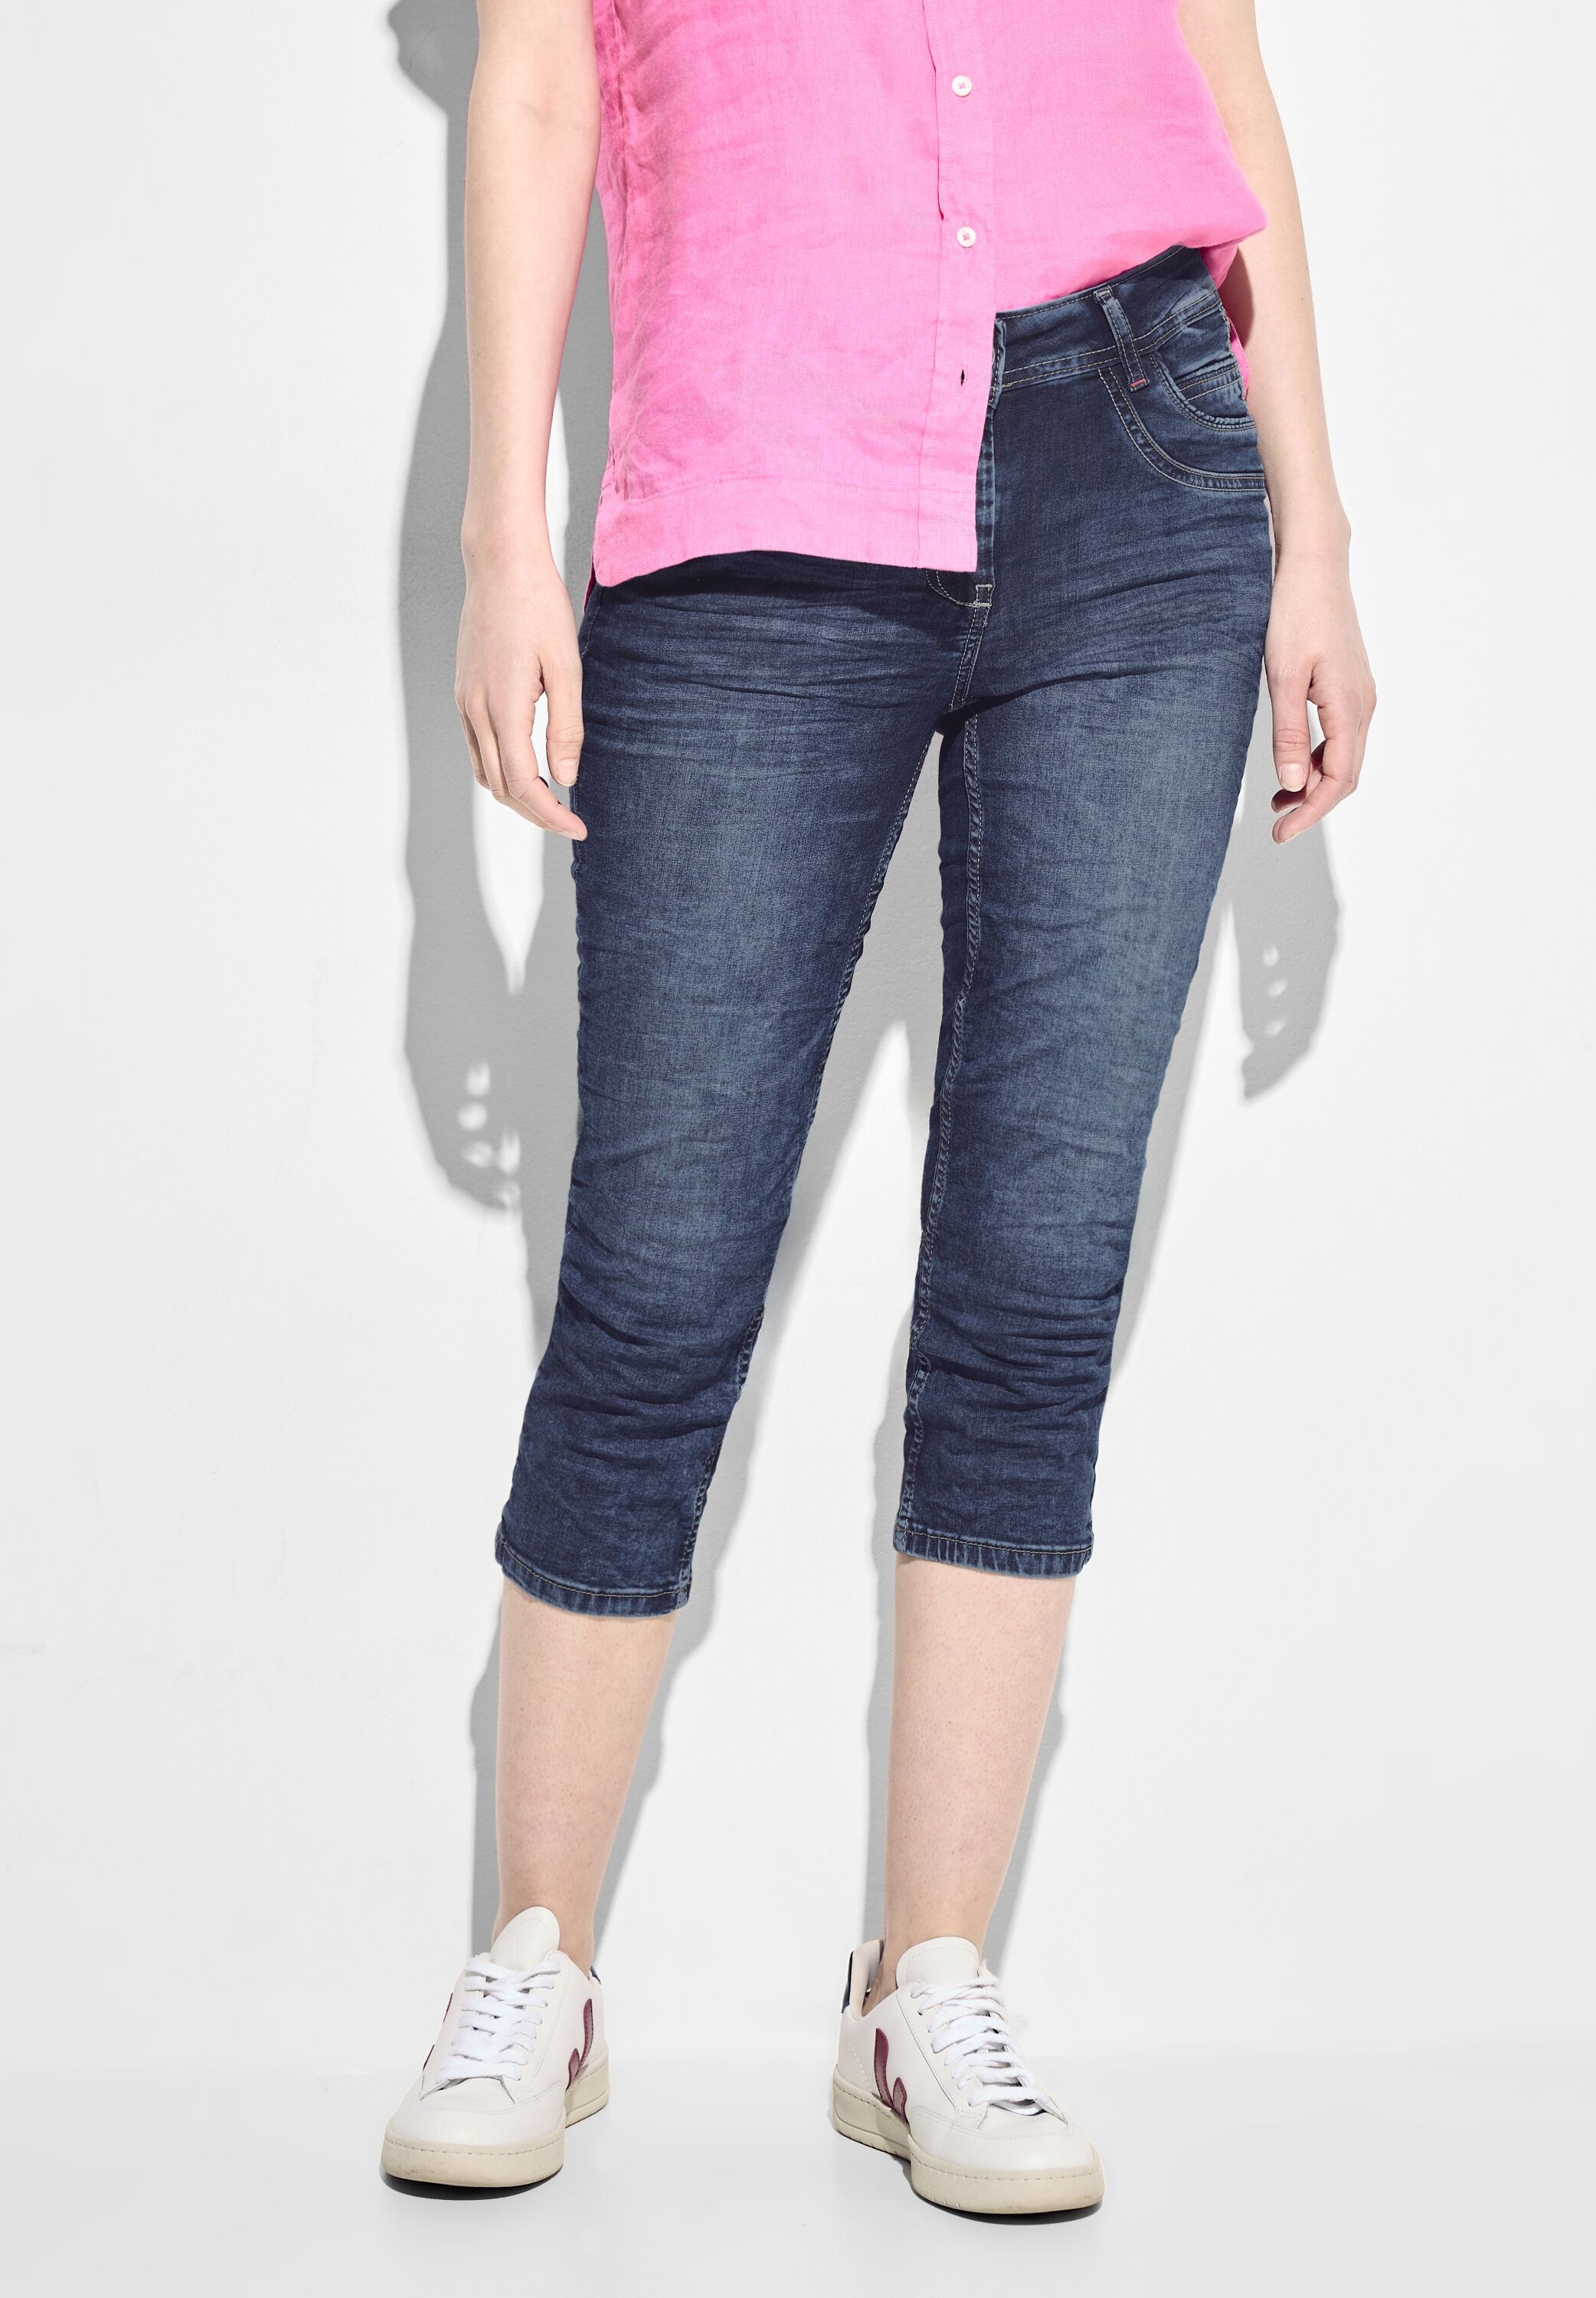 3/4-Jeans, mit Used-Look